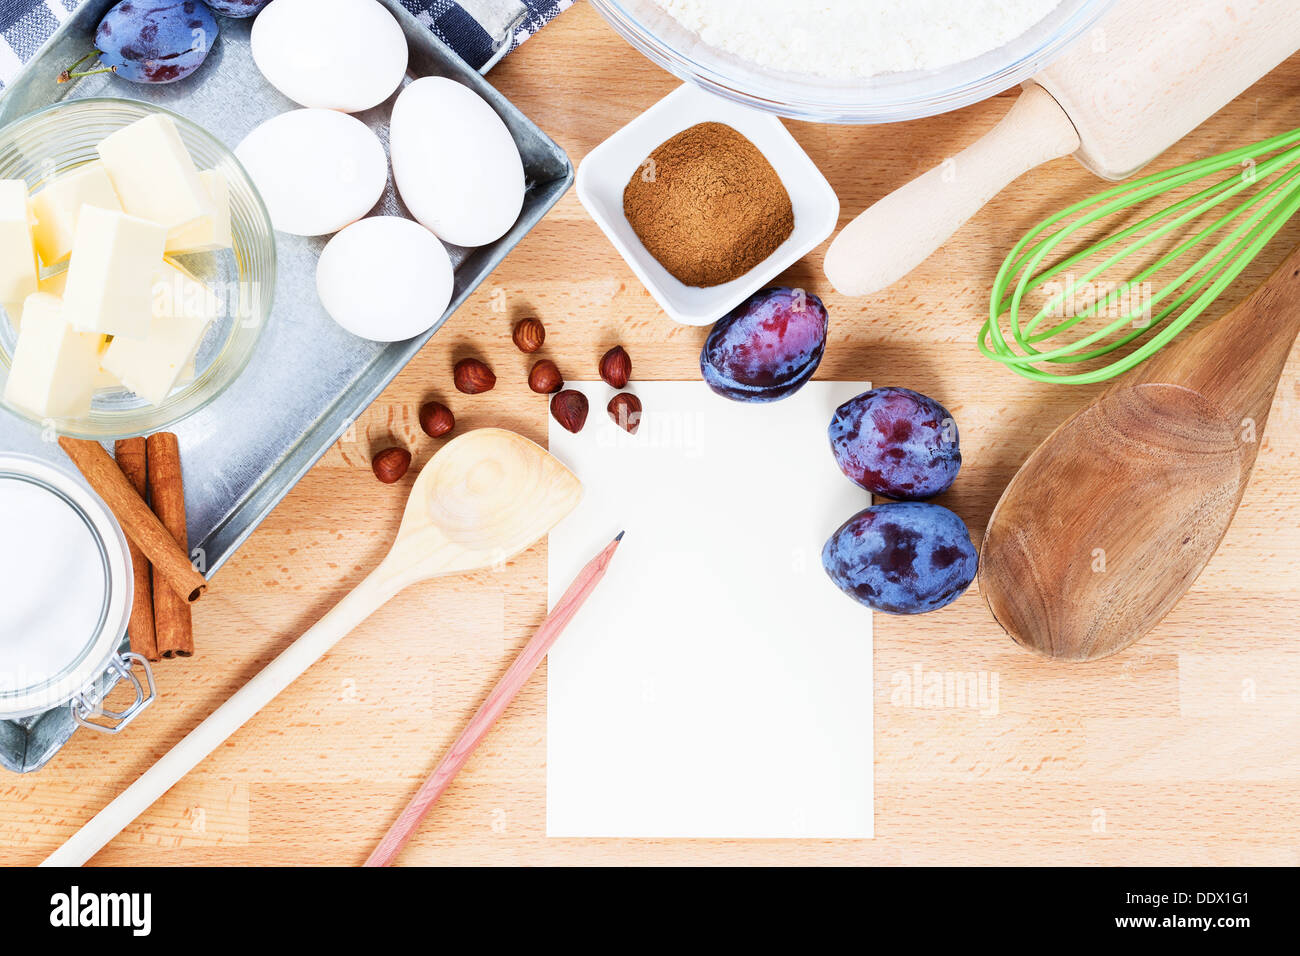 writing a recipe for plum cake with baking ingredients and tools from top with paper and a pencil Stock Photo